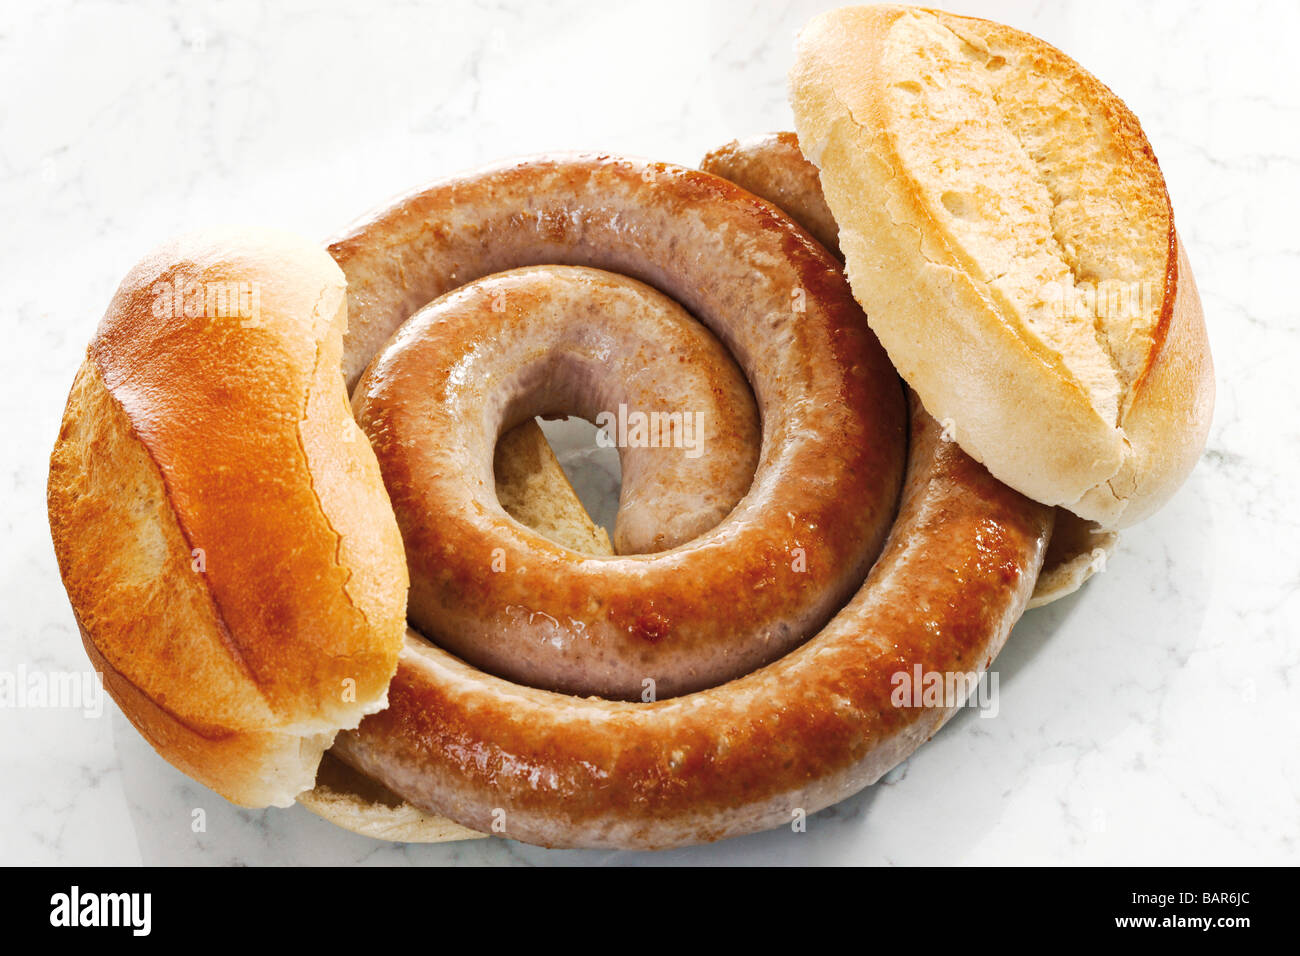 German Bratwurst, fried sausage and bread roll, close-up Stock Photo